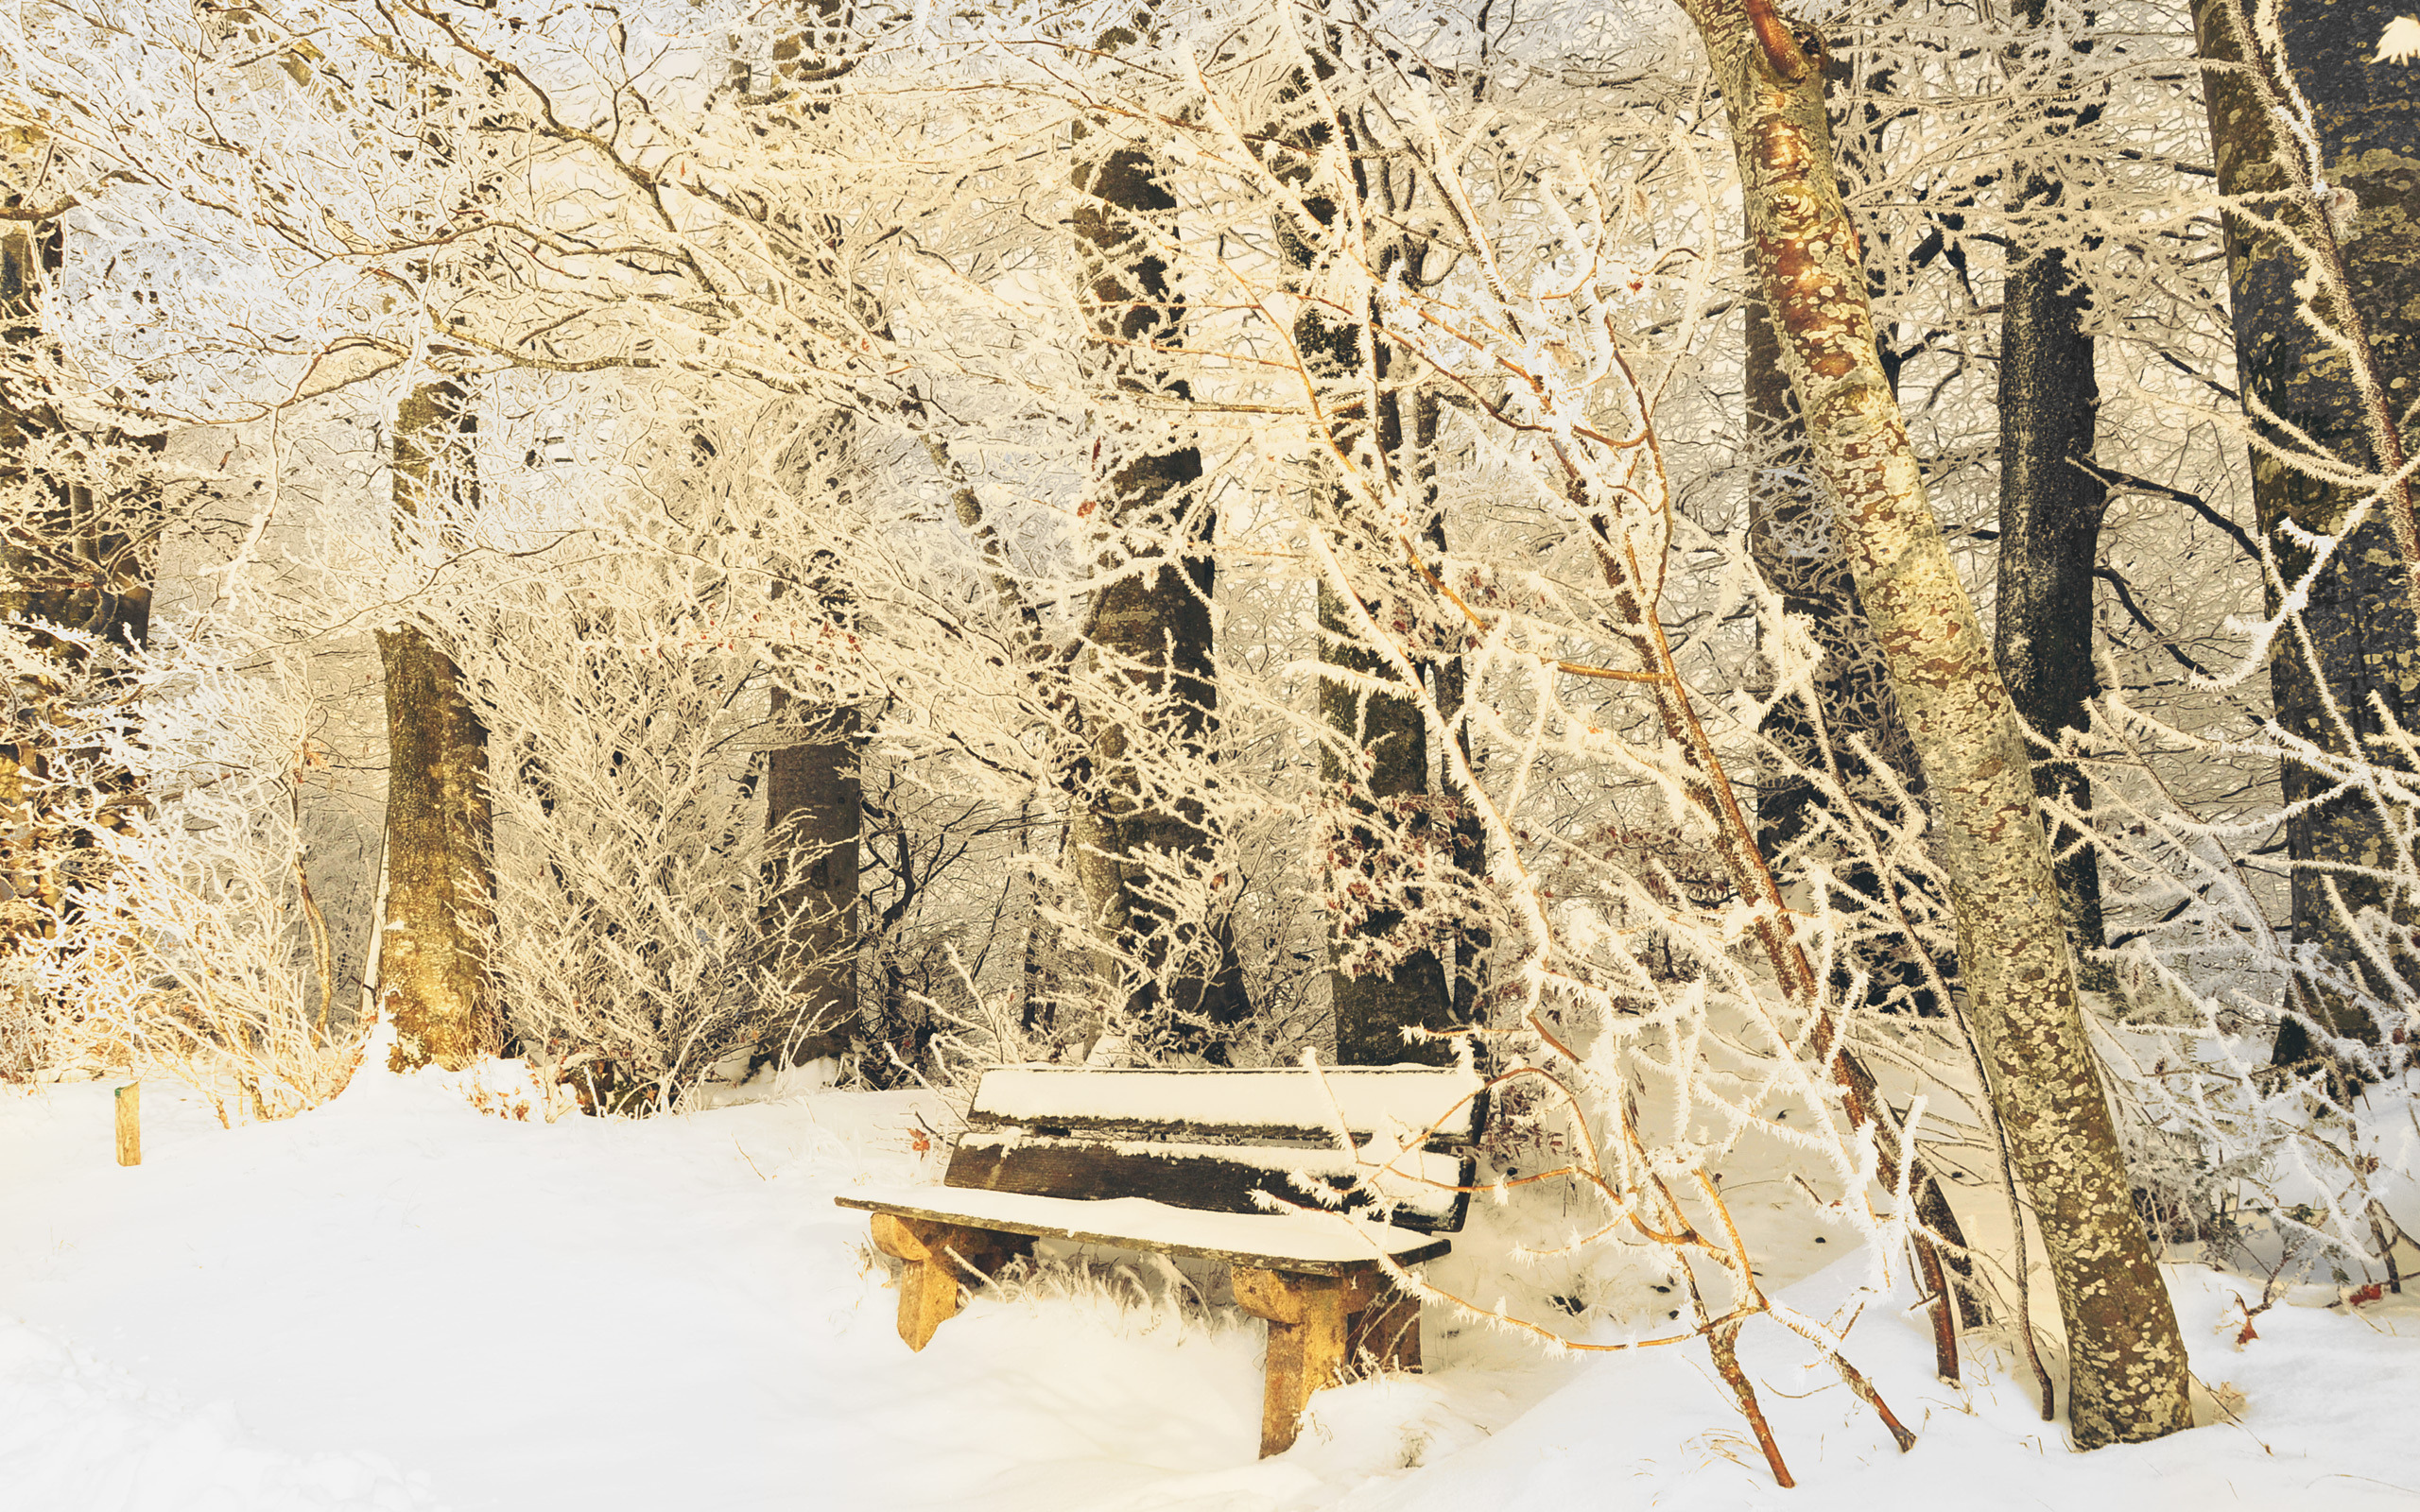 park, Bench, Bench, Winter, Cold, Snow, Trunks, Nature, Branches, Frost, Trees, Park Wallpaper